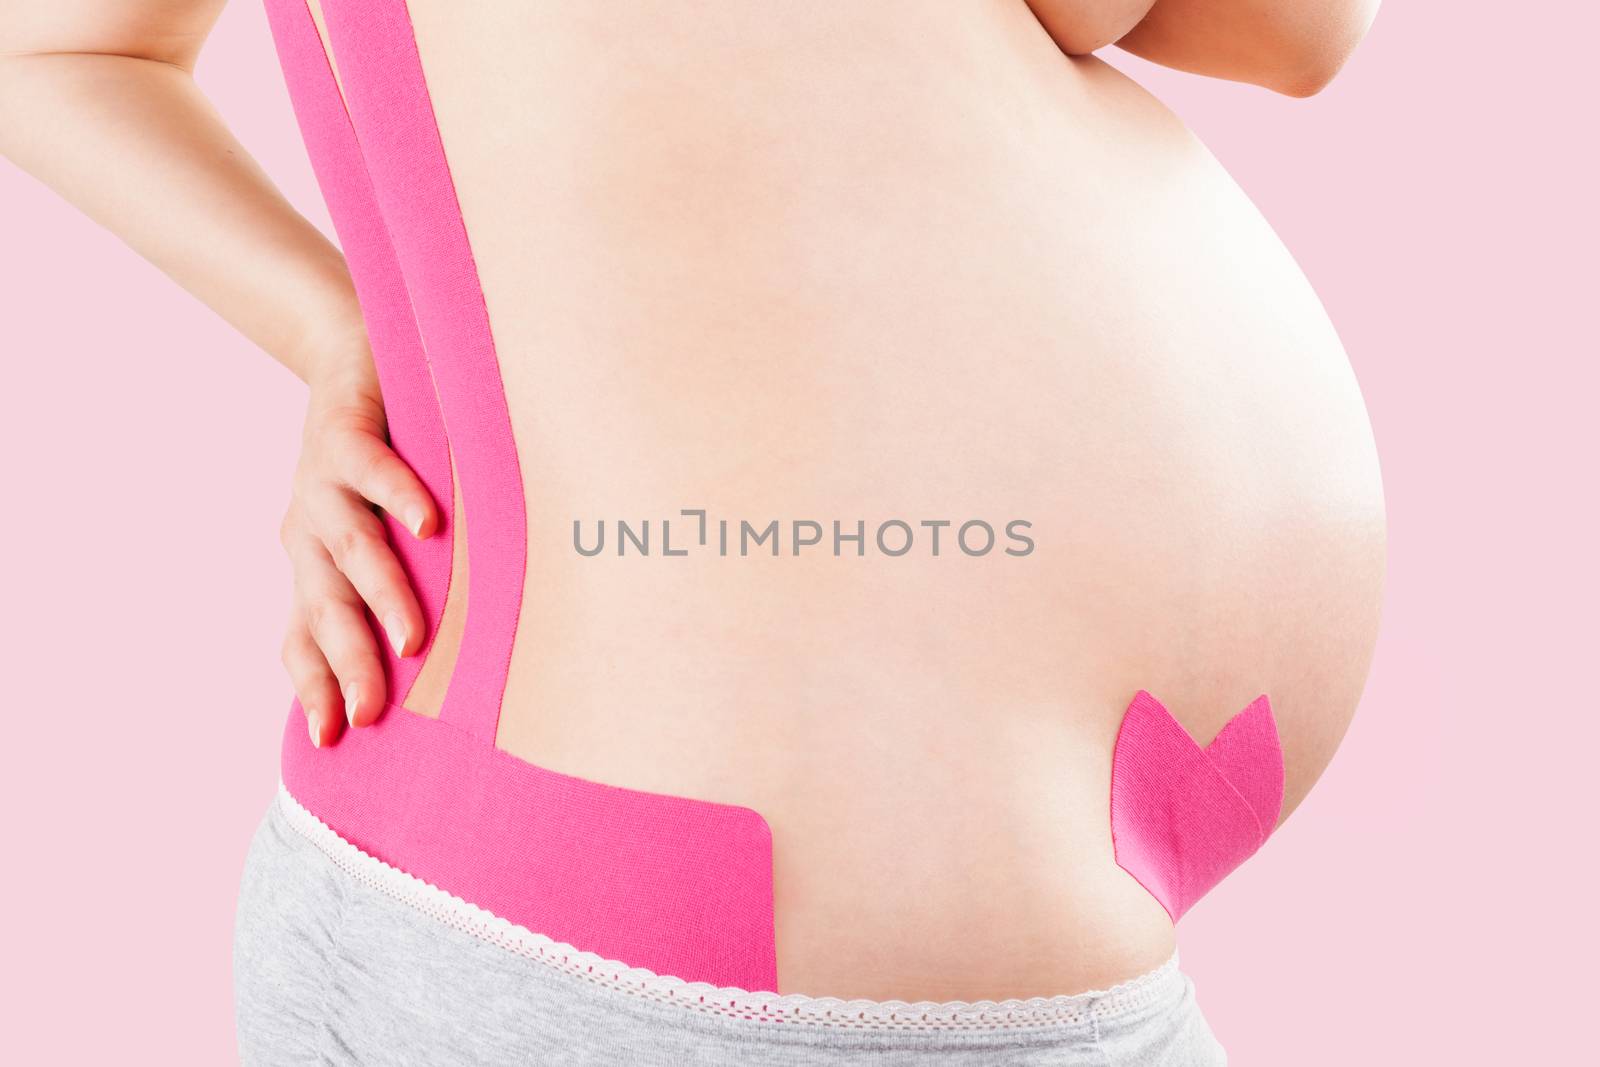 Kinesio tape on pregnant. by eskymaks